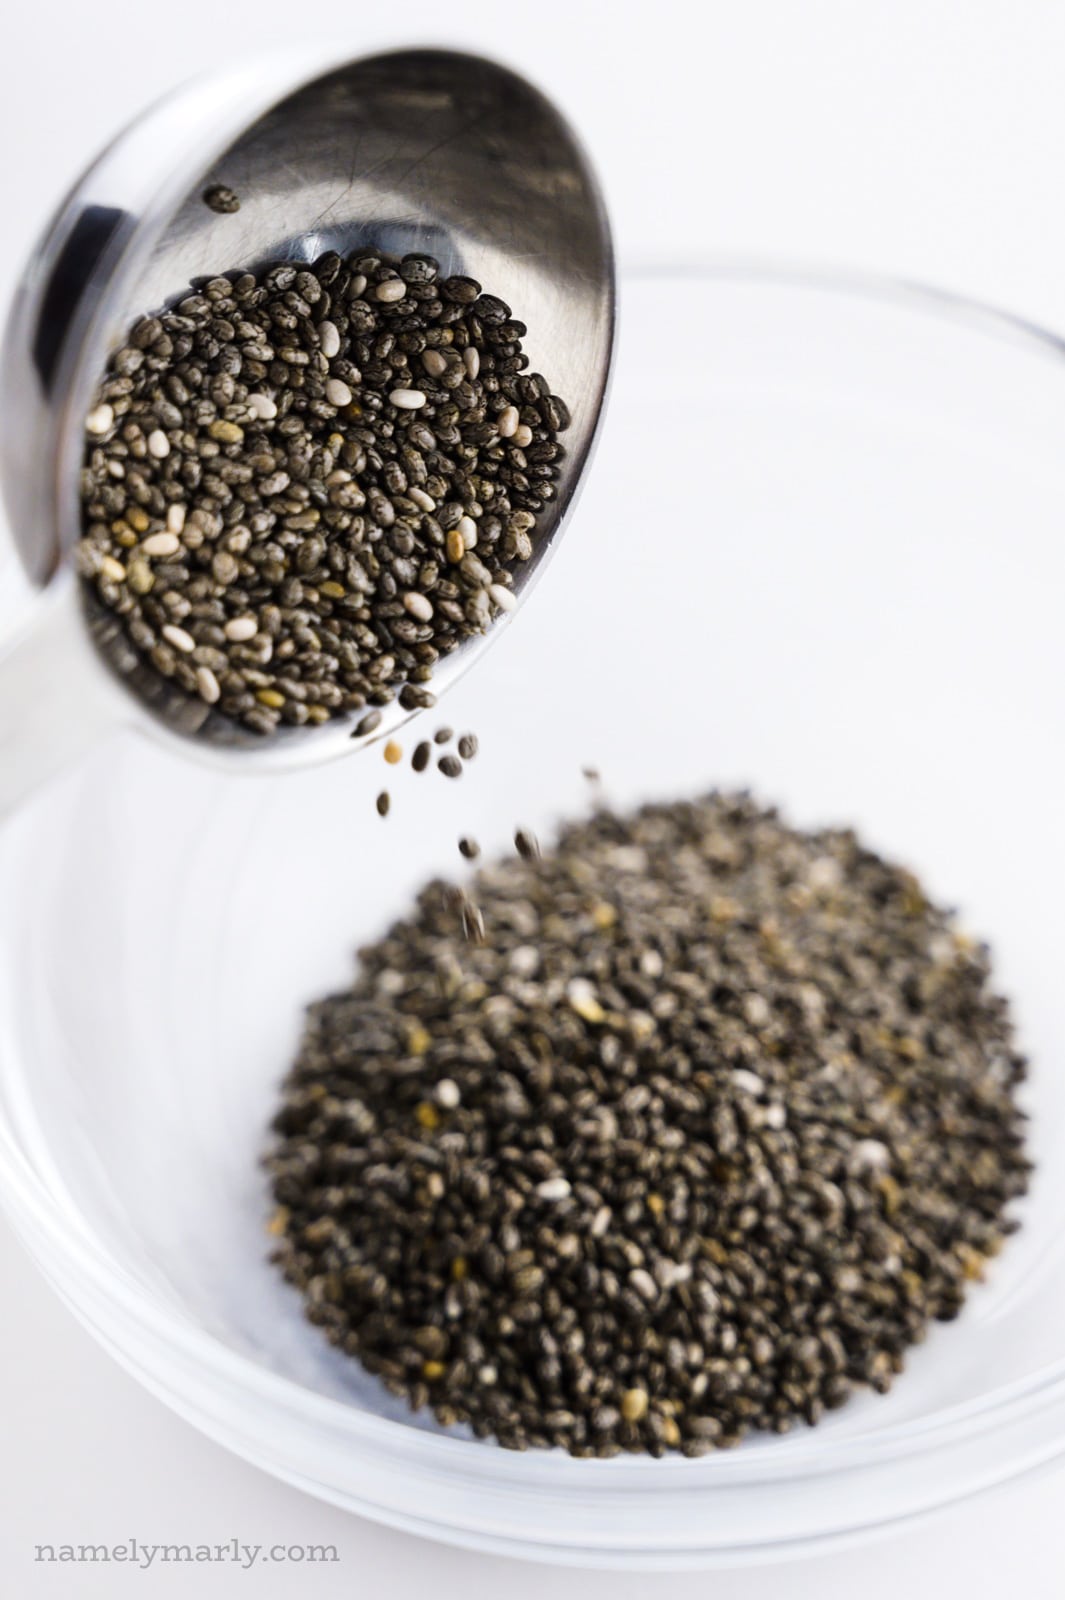 A tablespoon full of chia seeds is pouring them into a small glass bowl.